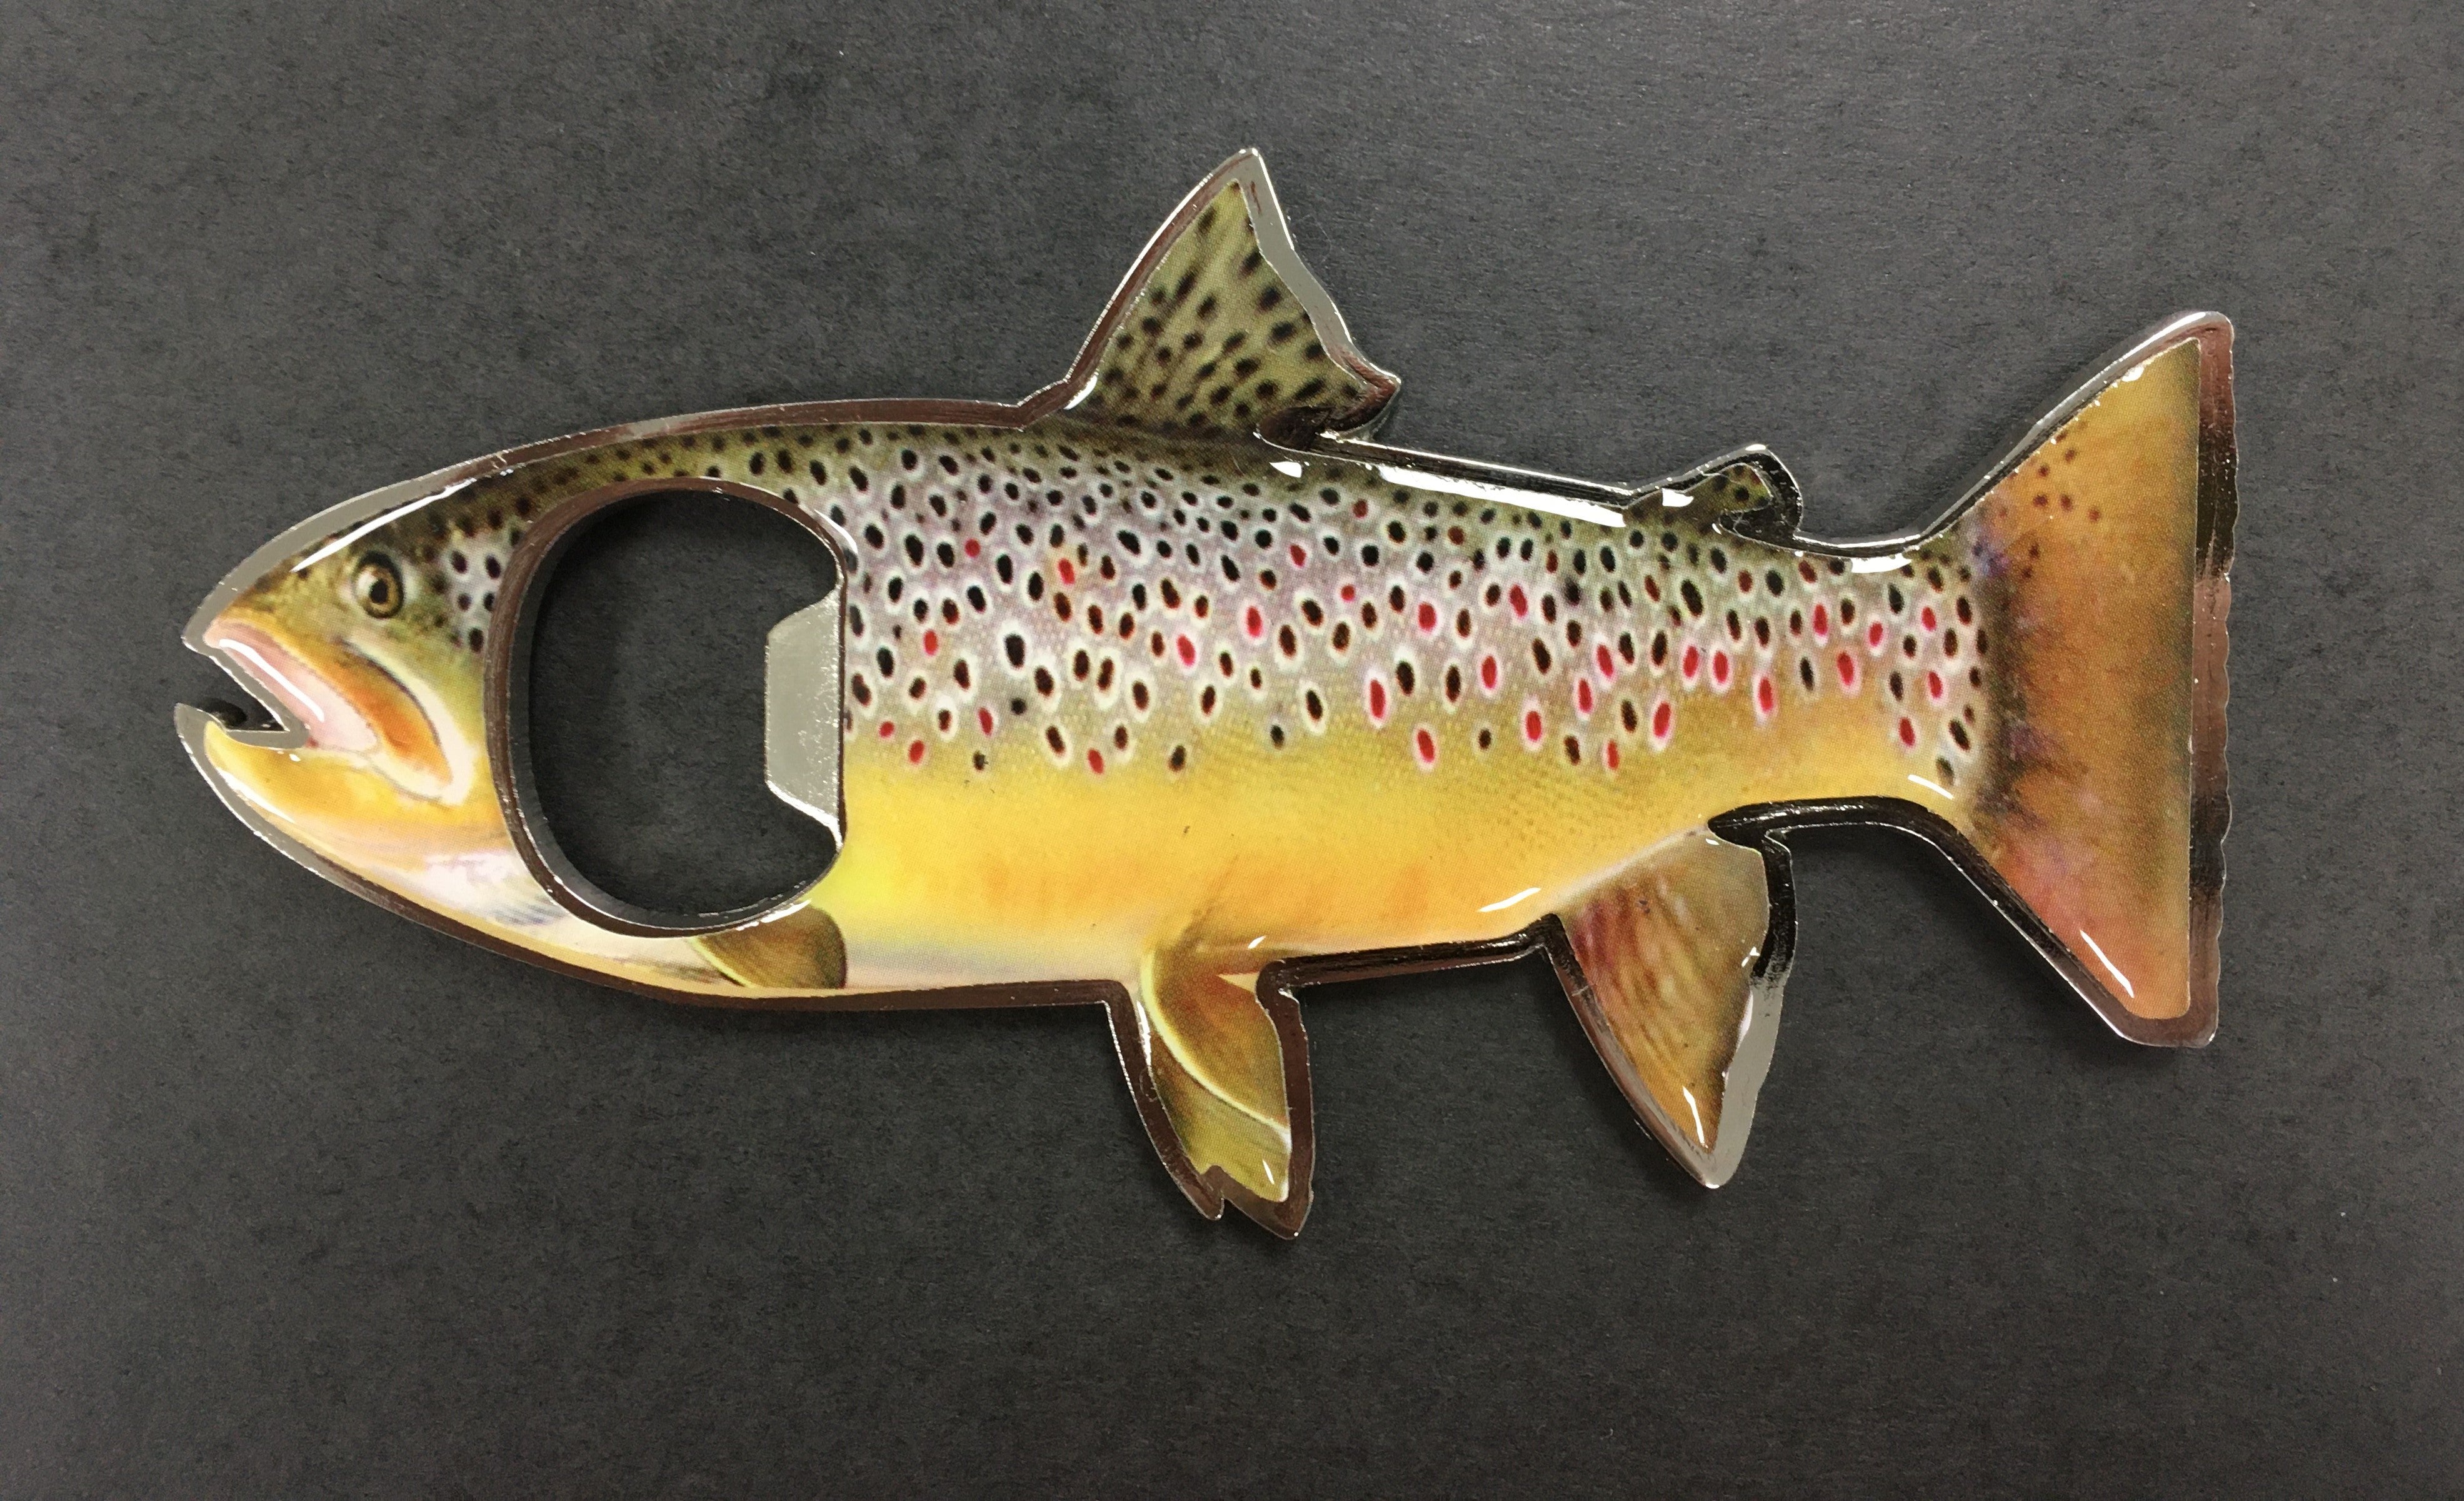 Trout Bottle Openers – Trophy Trout Lures and Fly Fishing